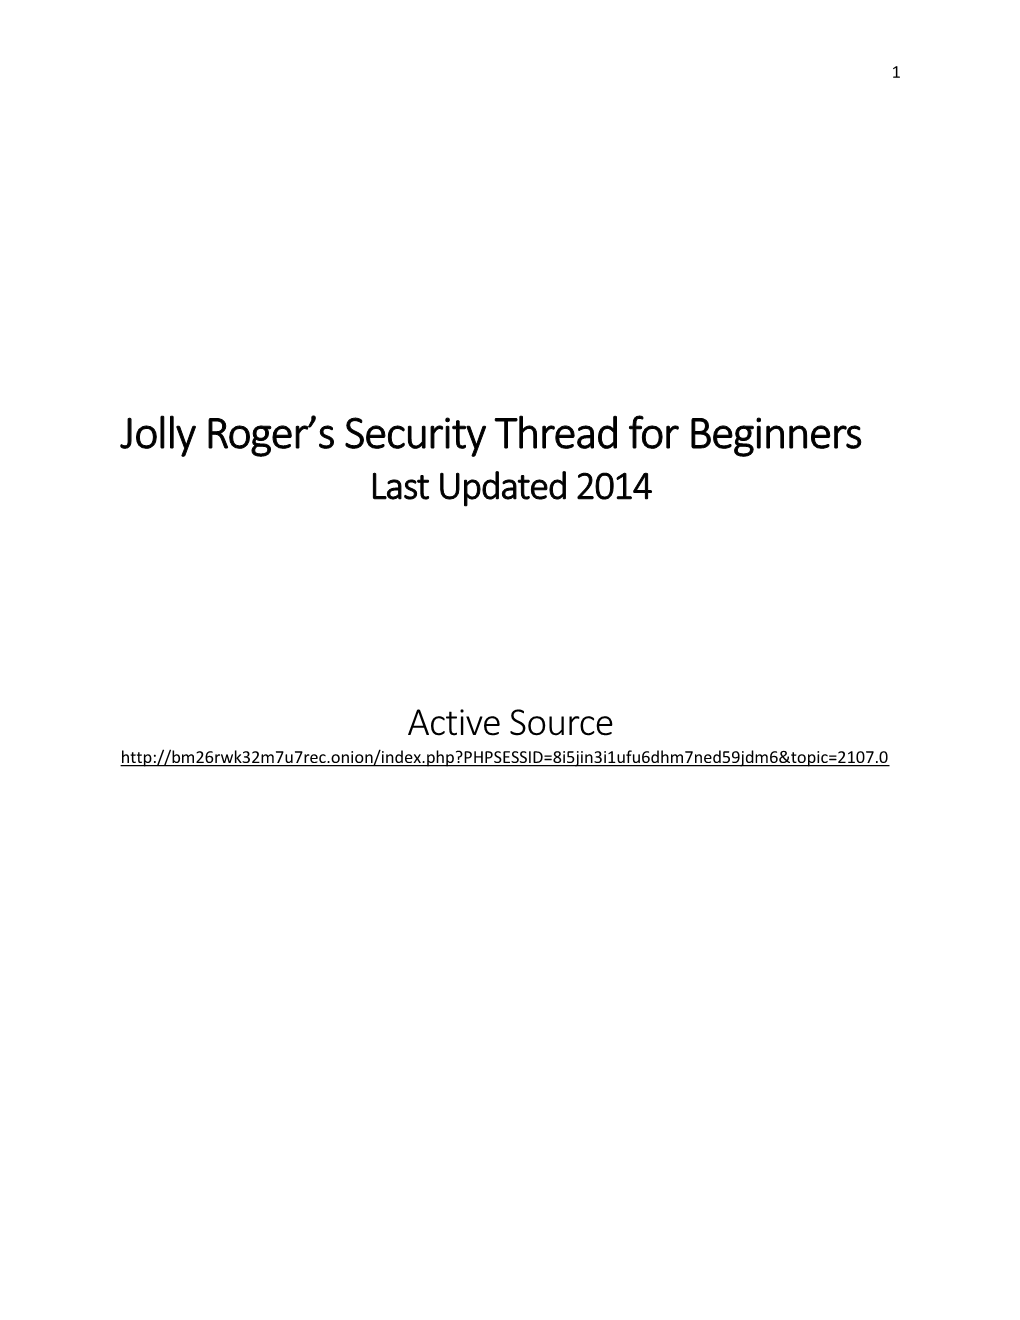 Jolly Roger's Security Thread for Beginners